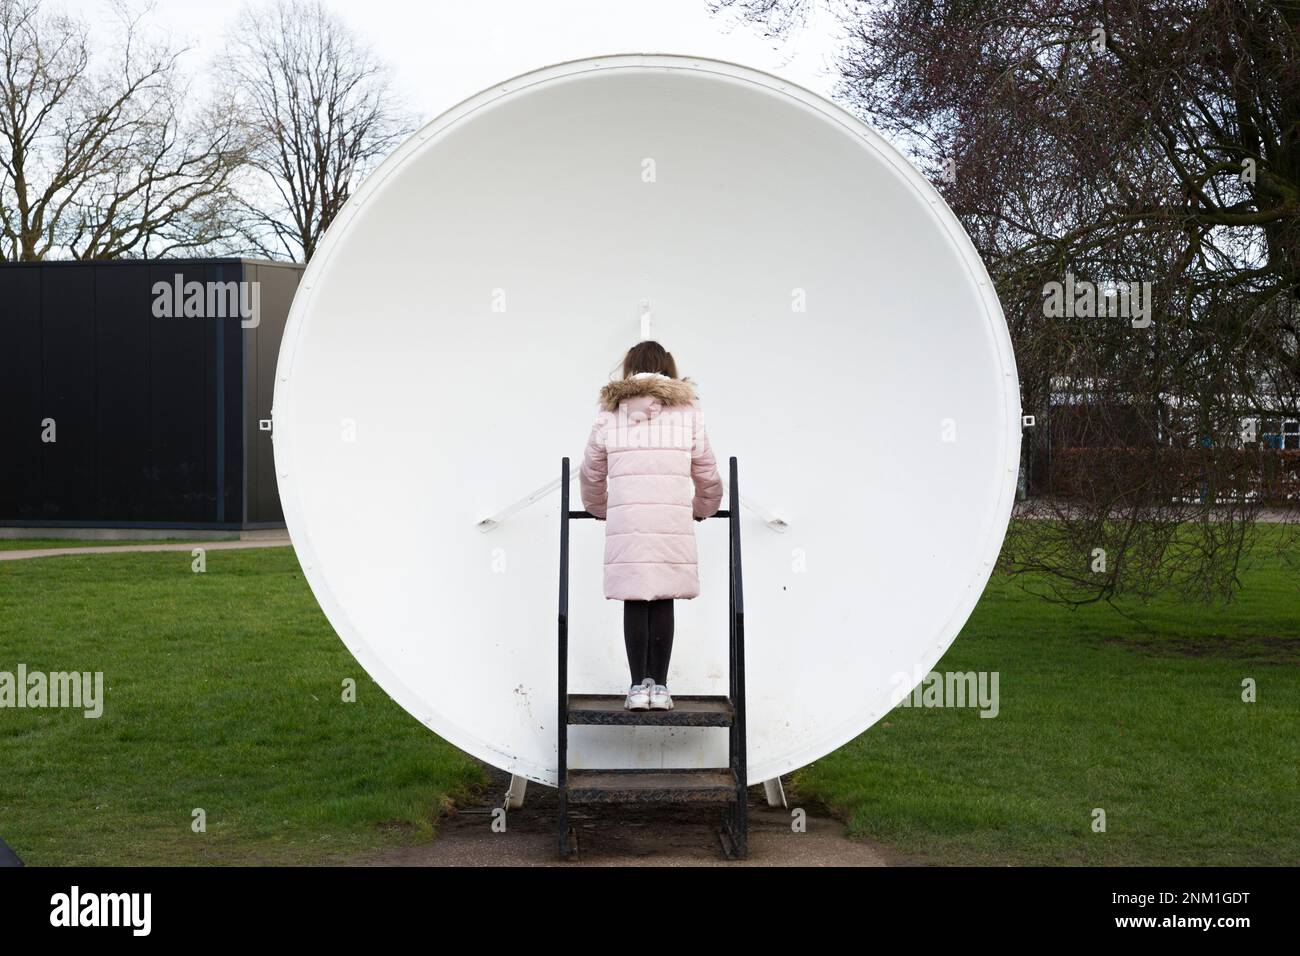 Kids / girls / children / child listen and speak at the Whispering Dish / Dishes which act as an acoustic mirror to transmit and focus sound waves. (133) Stock Photo